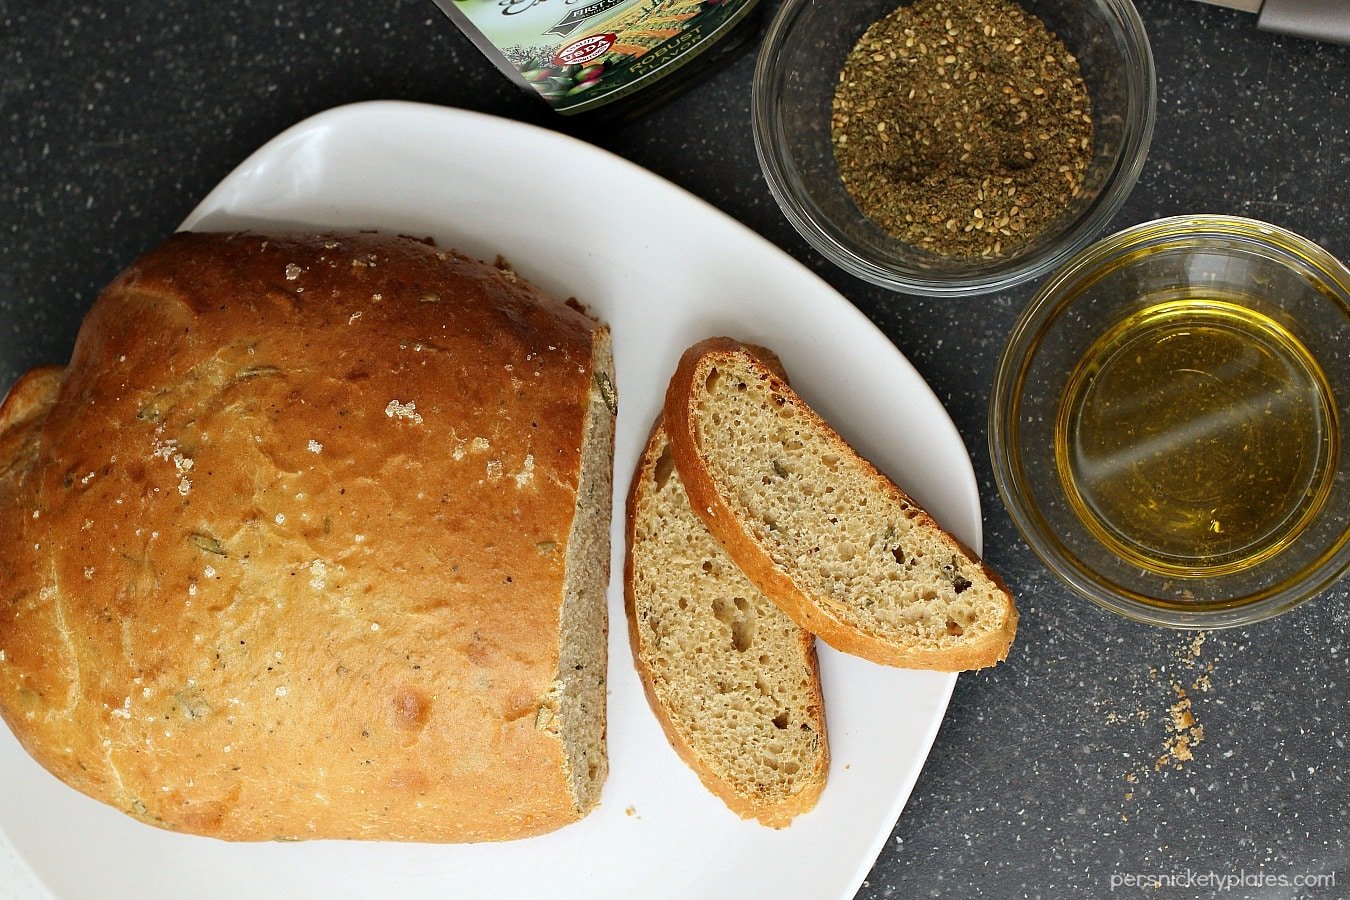 Rosemary Olive Oil Bread is light and flavorful and easy to make. This homemade bread is perfect served warm with a pat of creamy butter. Nothing much is better than fresh baked bread.